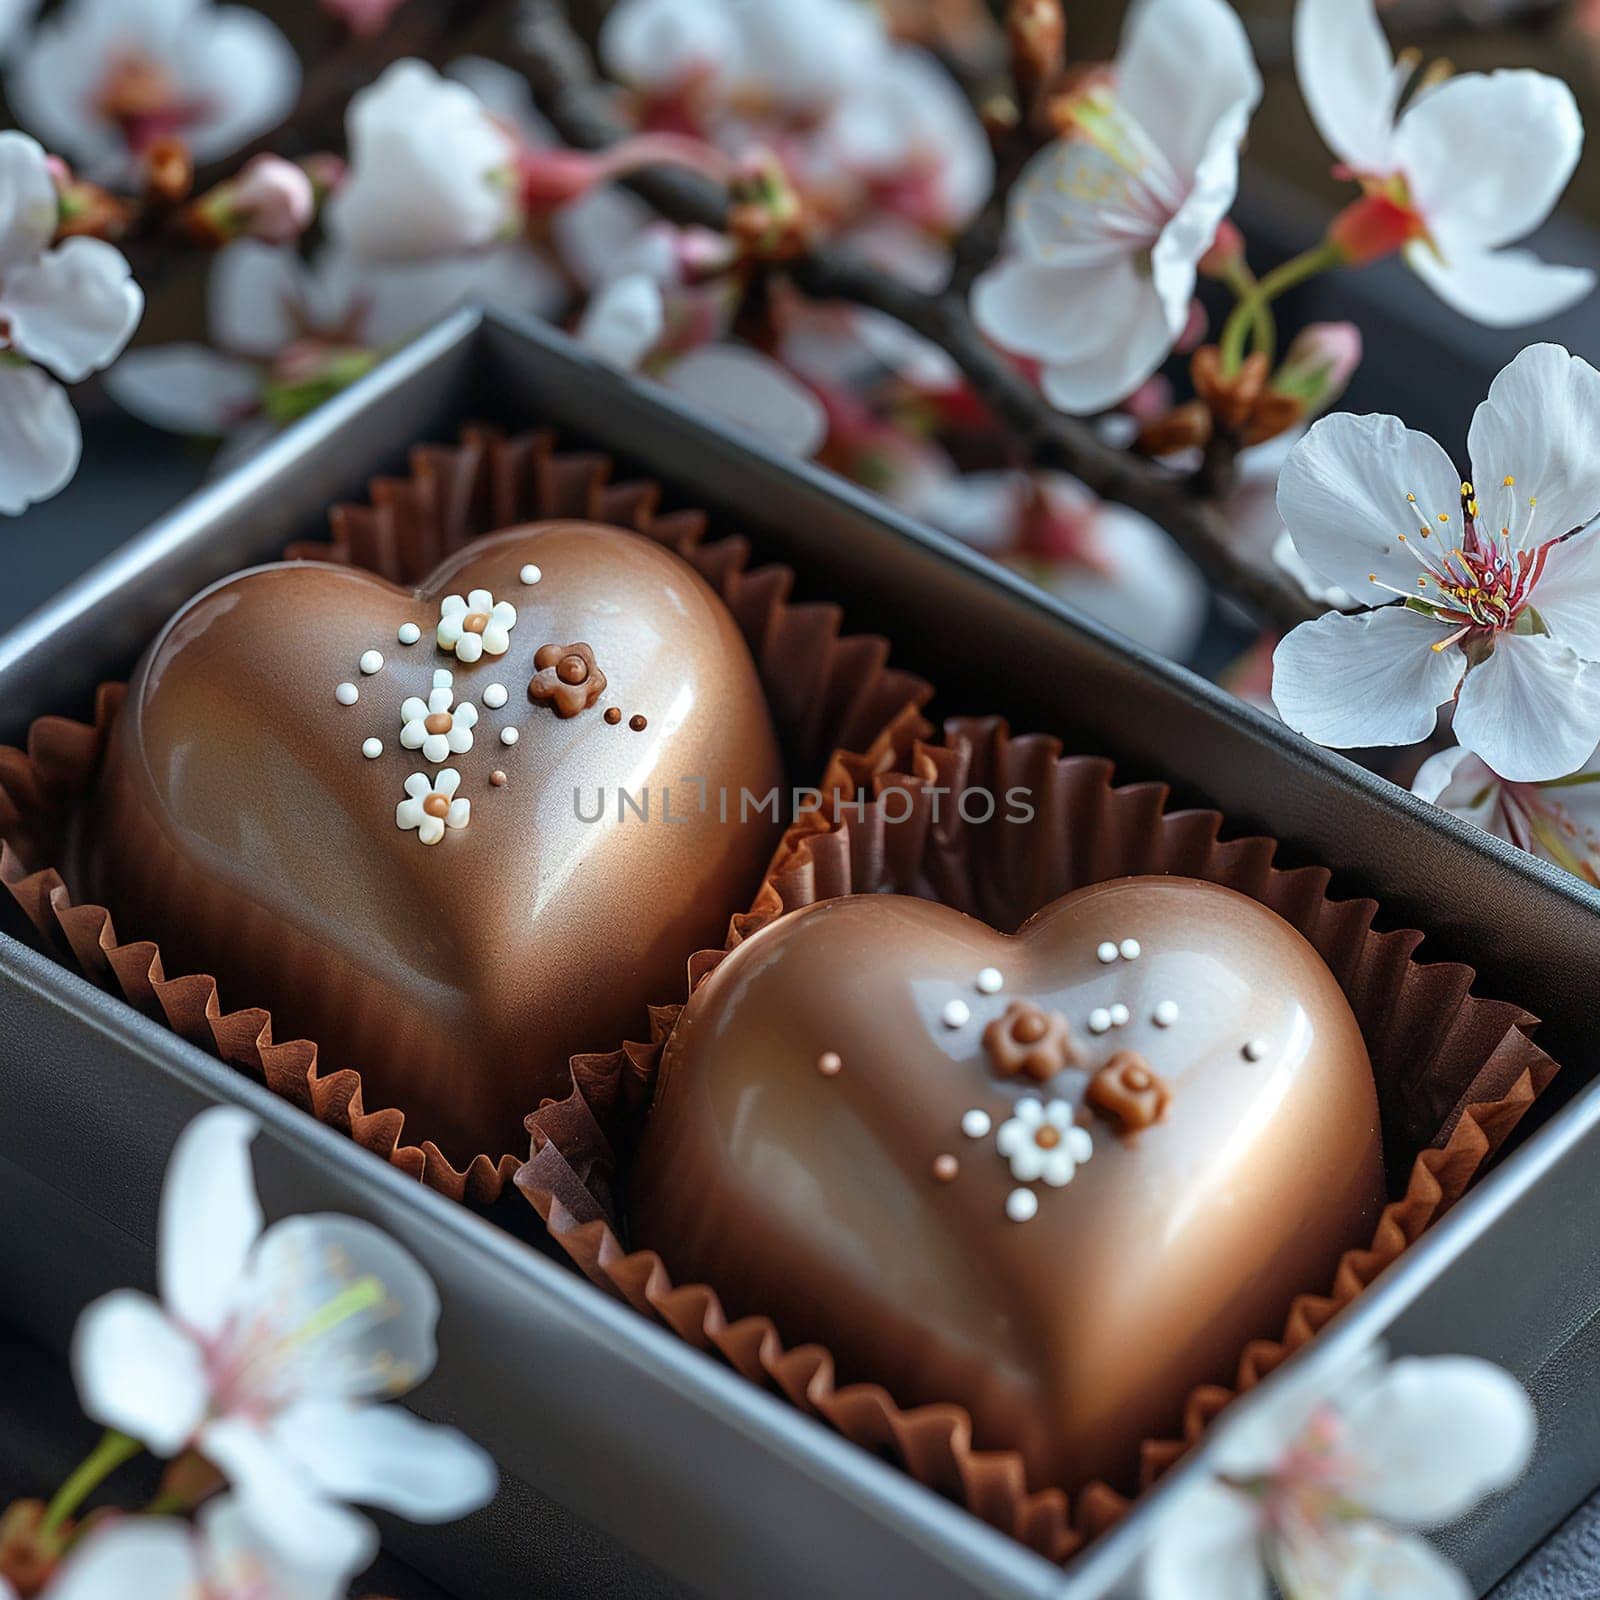 Pair of chocolate hearts nestled in silver box by Benzoix